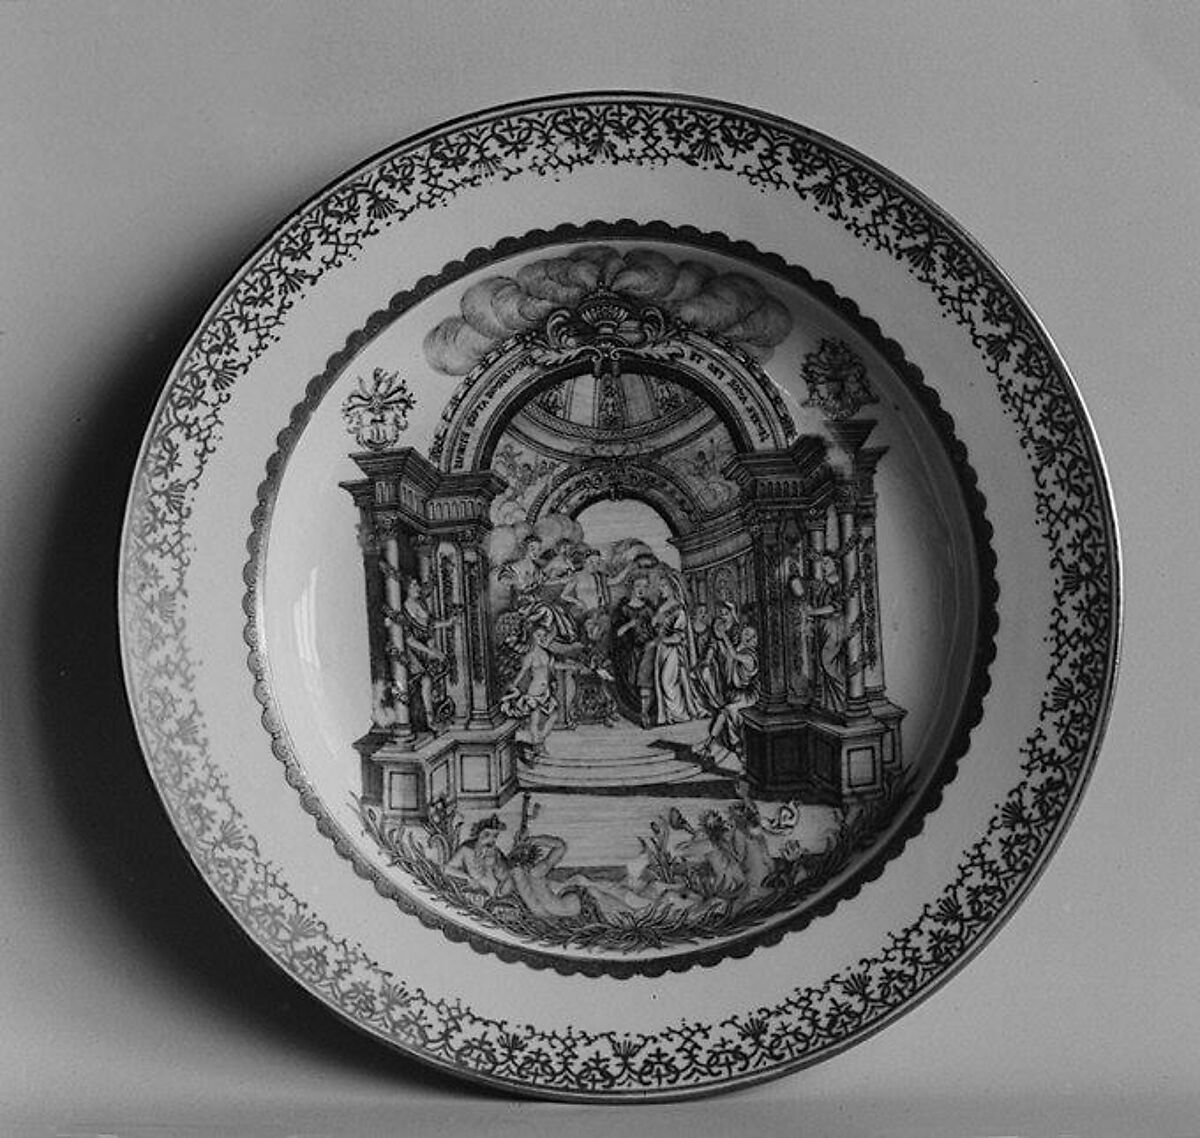 Plate, Hard-paste porcelain, Chinese, for Dutch market 